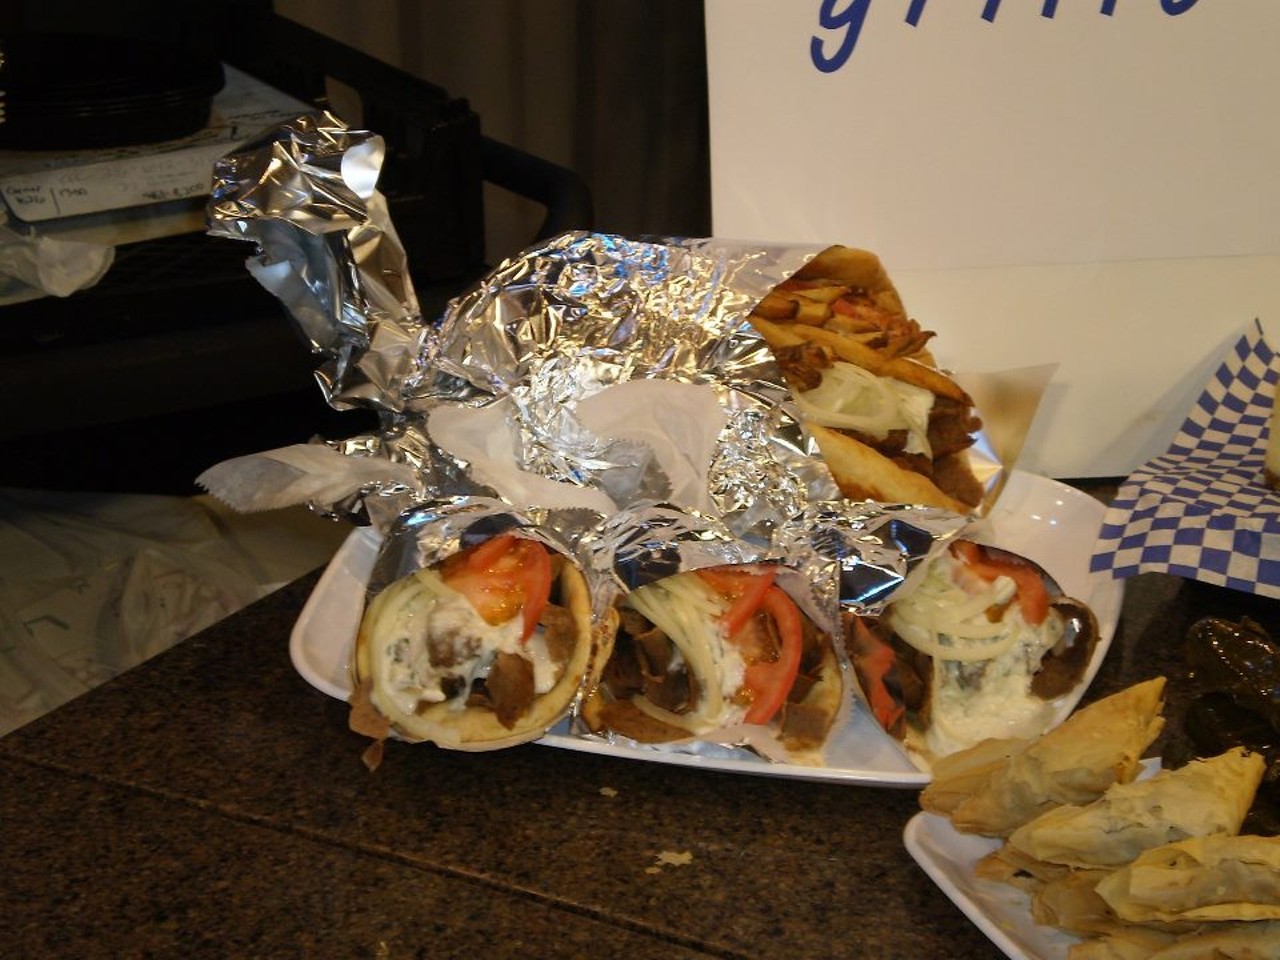 This lunch and late night Lakewood landmark serves up some of the most creative gyros in the area. Our pick is the American Gyro served dirty style. That means yellow mustard replaces the traditional tzatziki sauce. Greek Village Grille is located at 14019 Madison Ave, Lakewood.